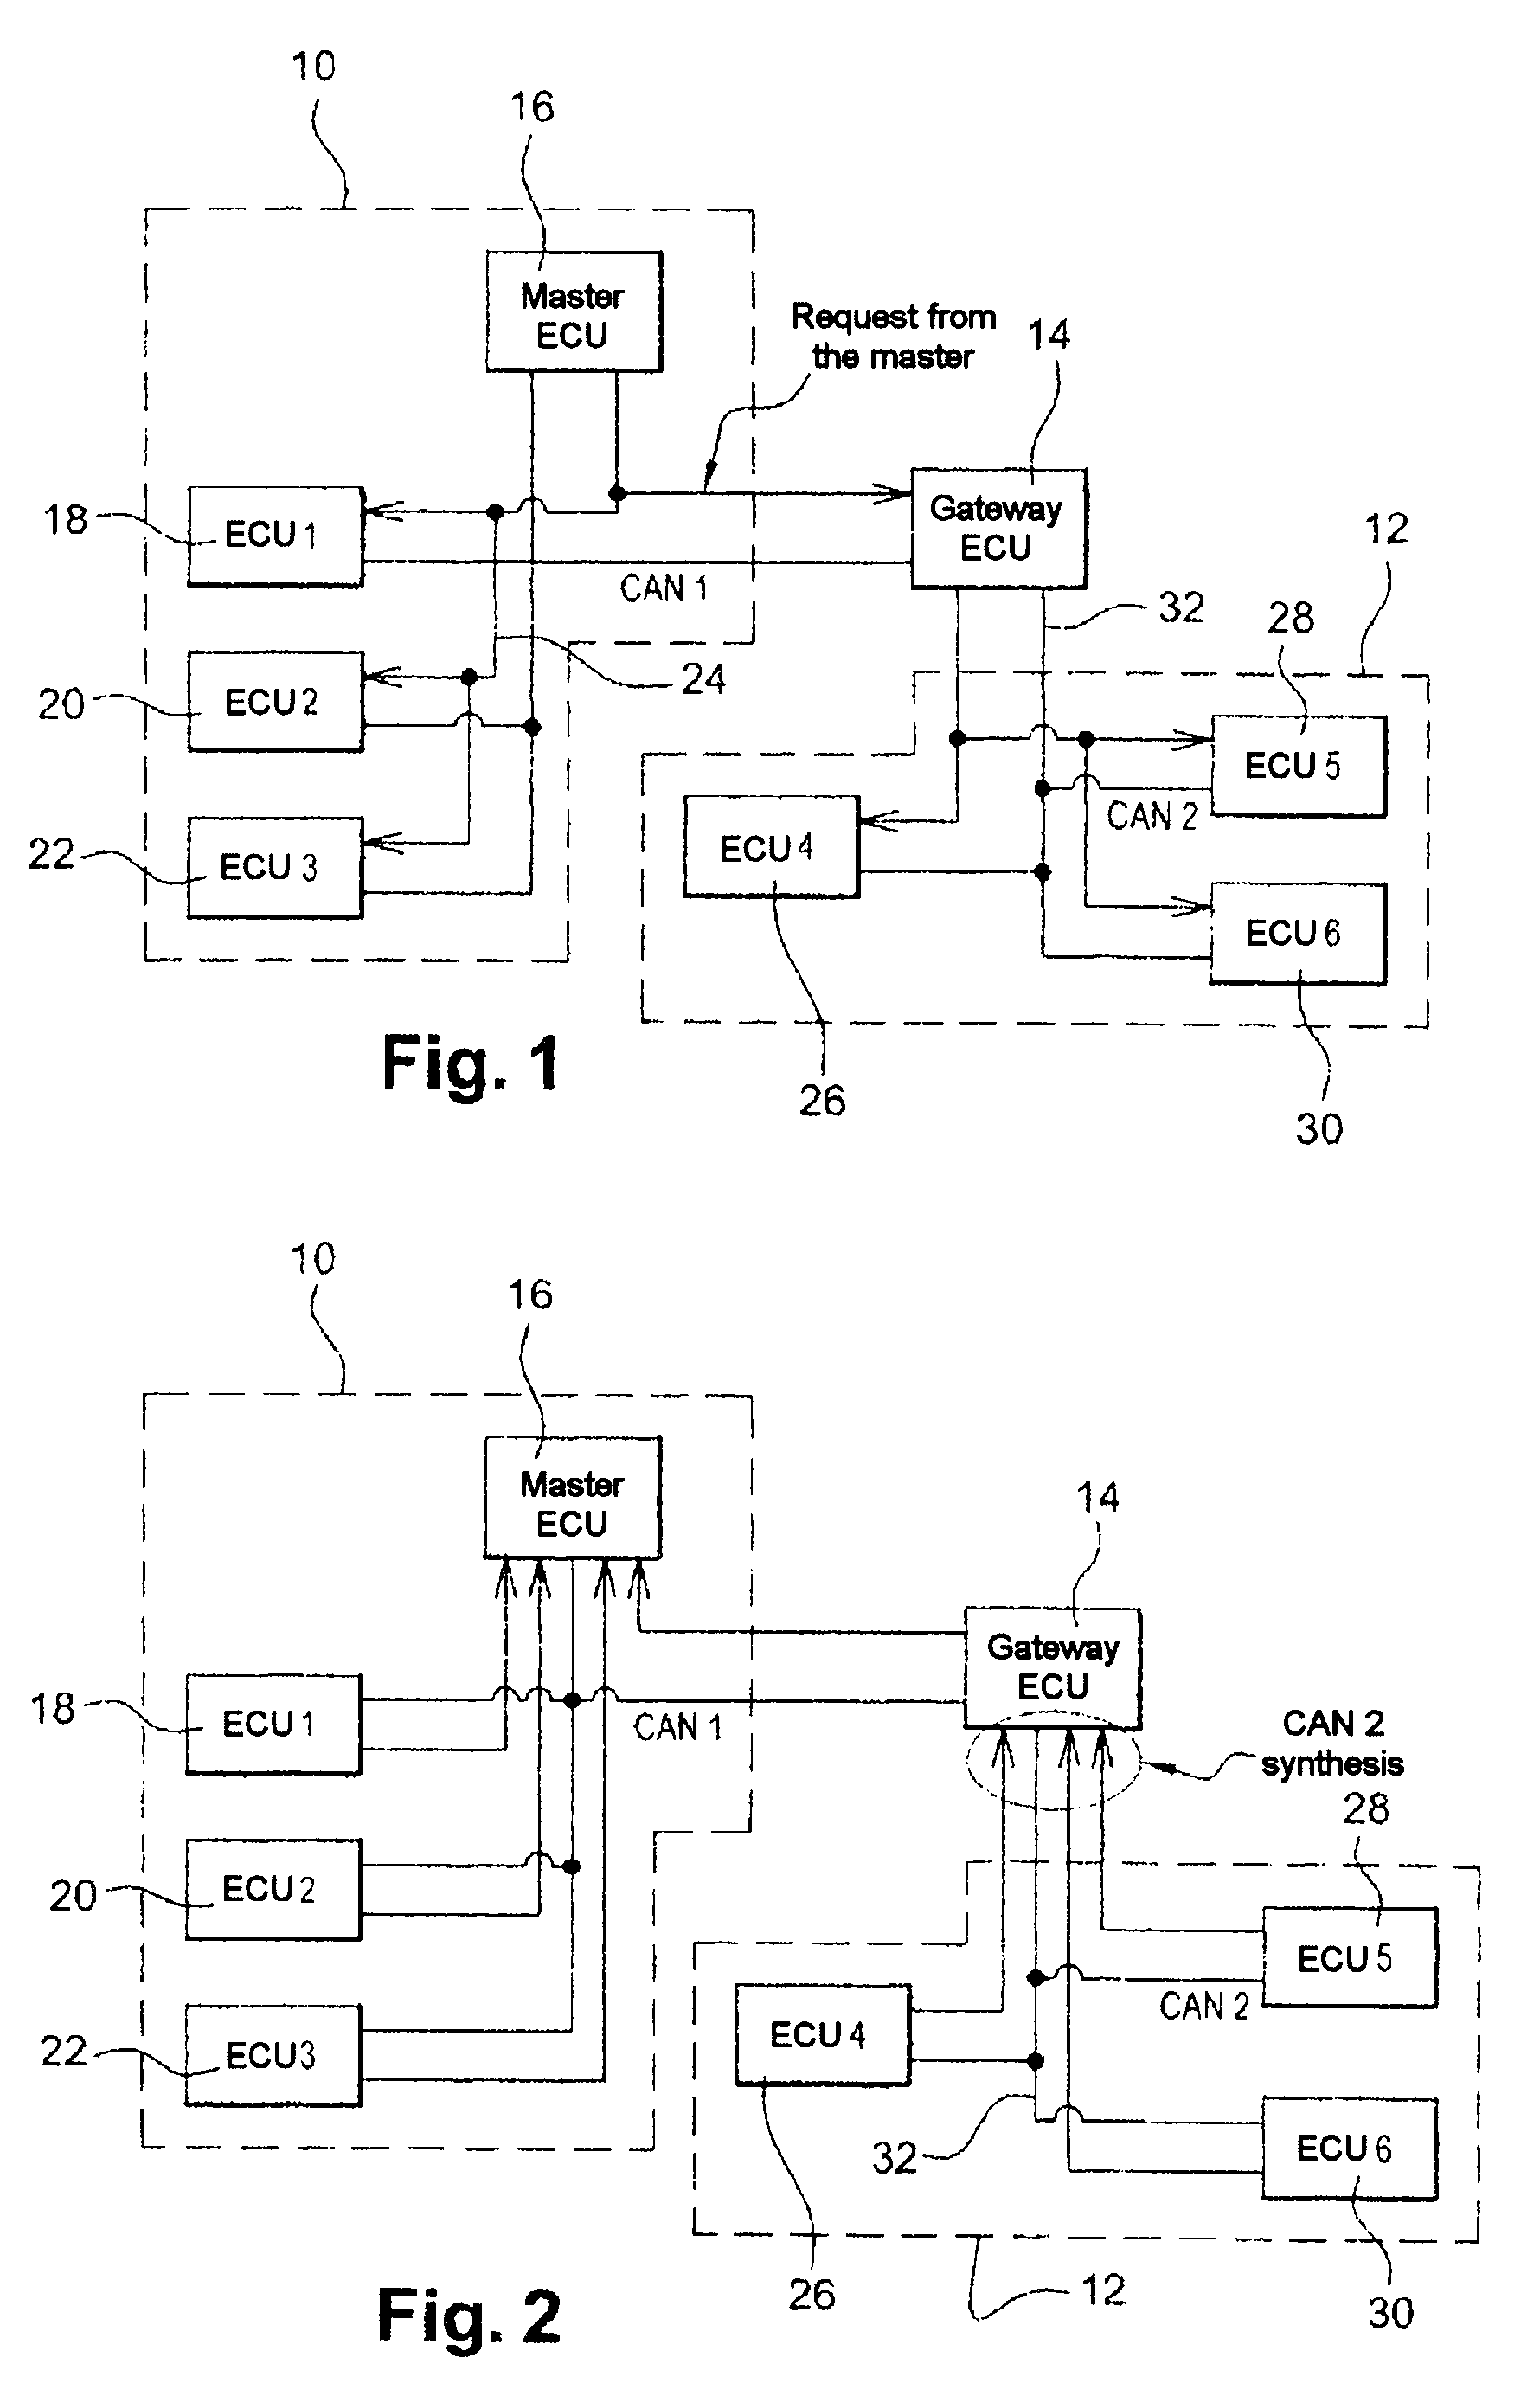 System for managing wakeup and sleep events of computers connected to a motor vehicle CAN network